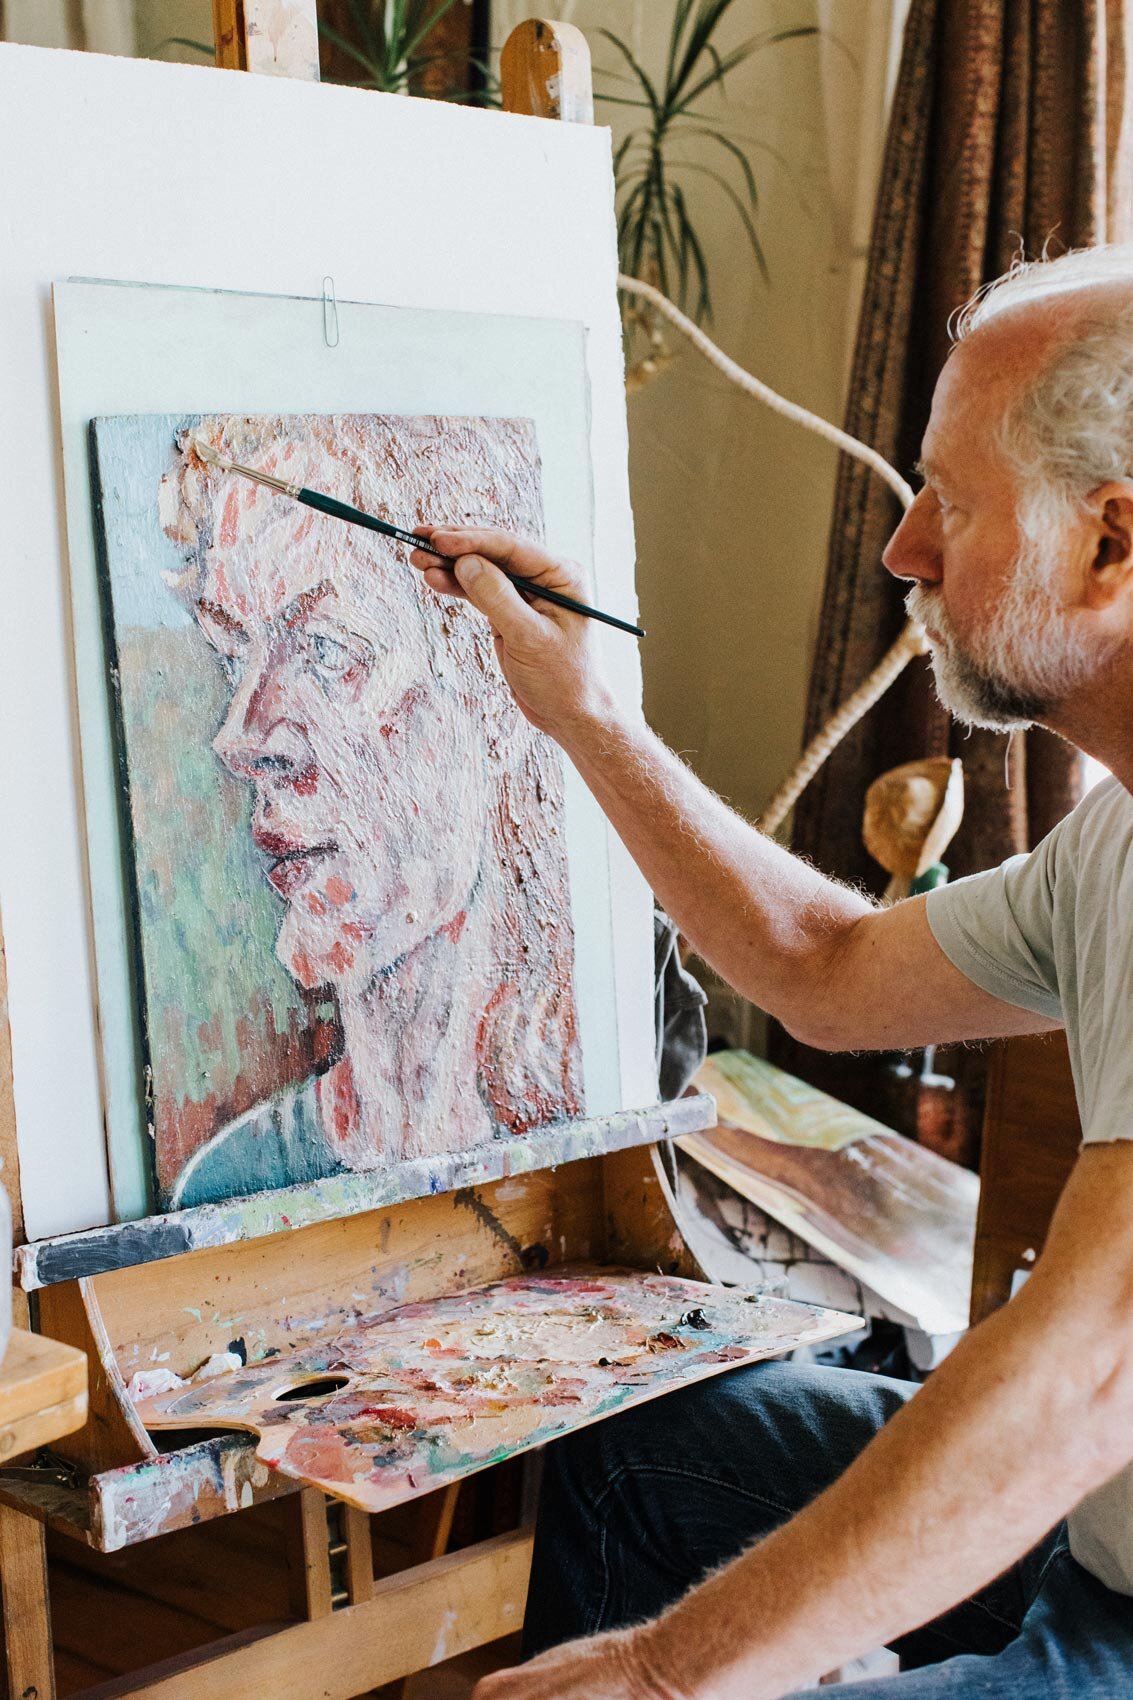  A portrait to be used in an upcoming film. Xander’s work has been featured in exhibits and galleries across the U.S. and abroad. Here, he works on a portrait to be used in an upcoming film. 